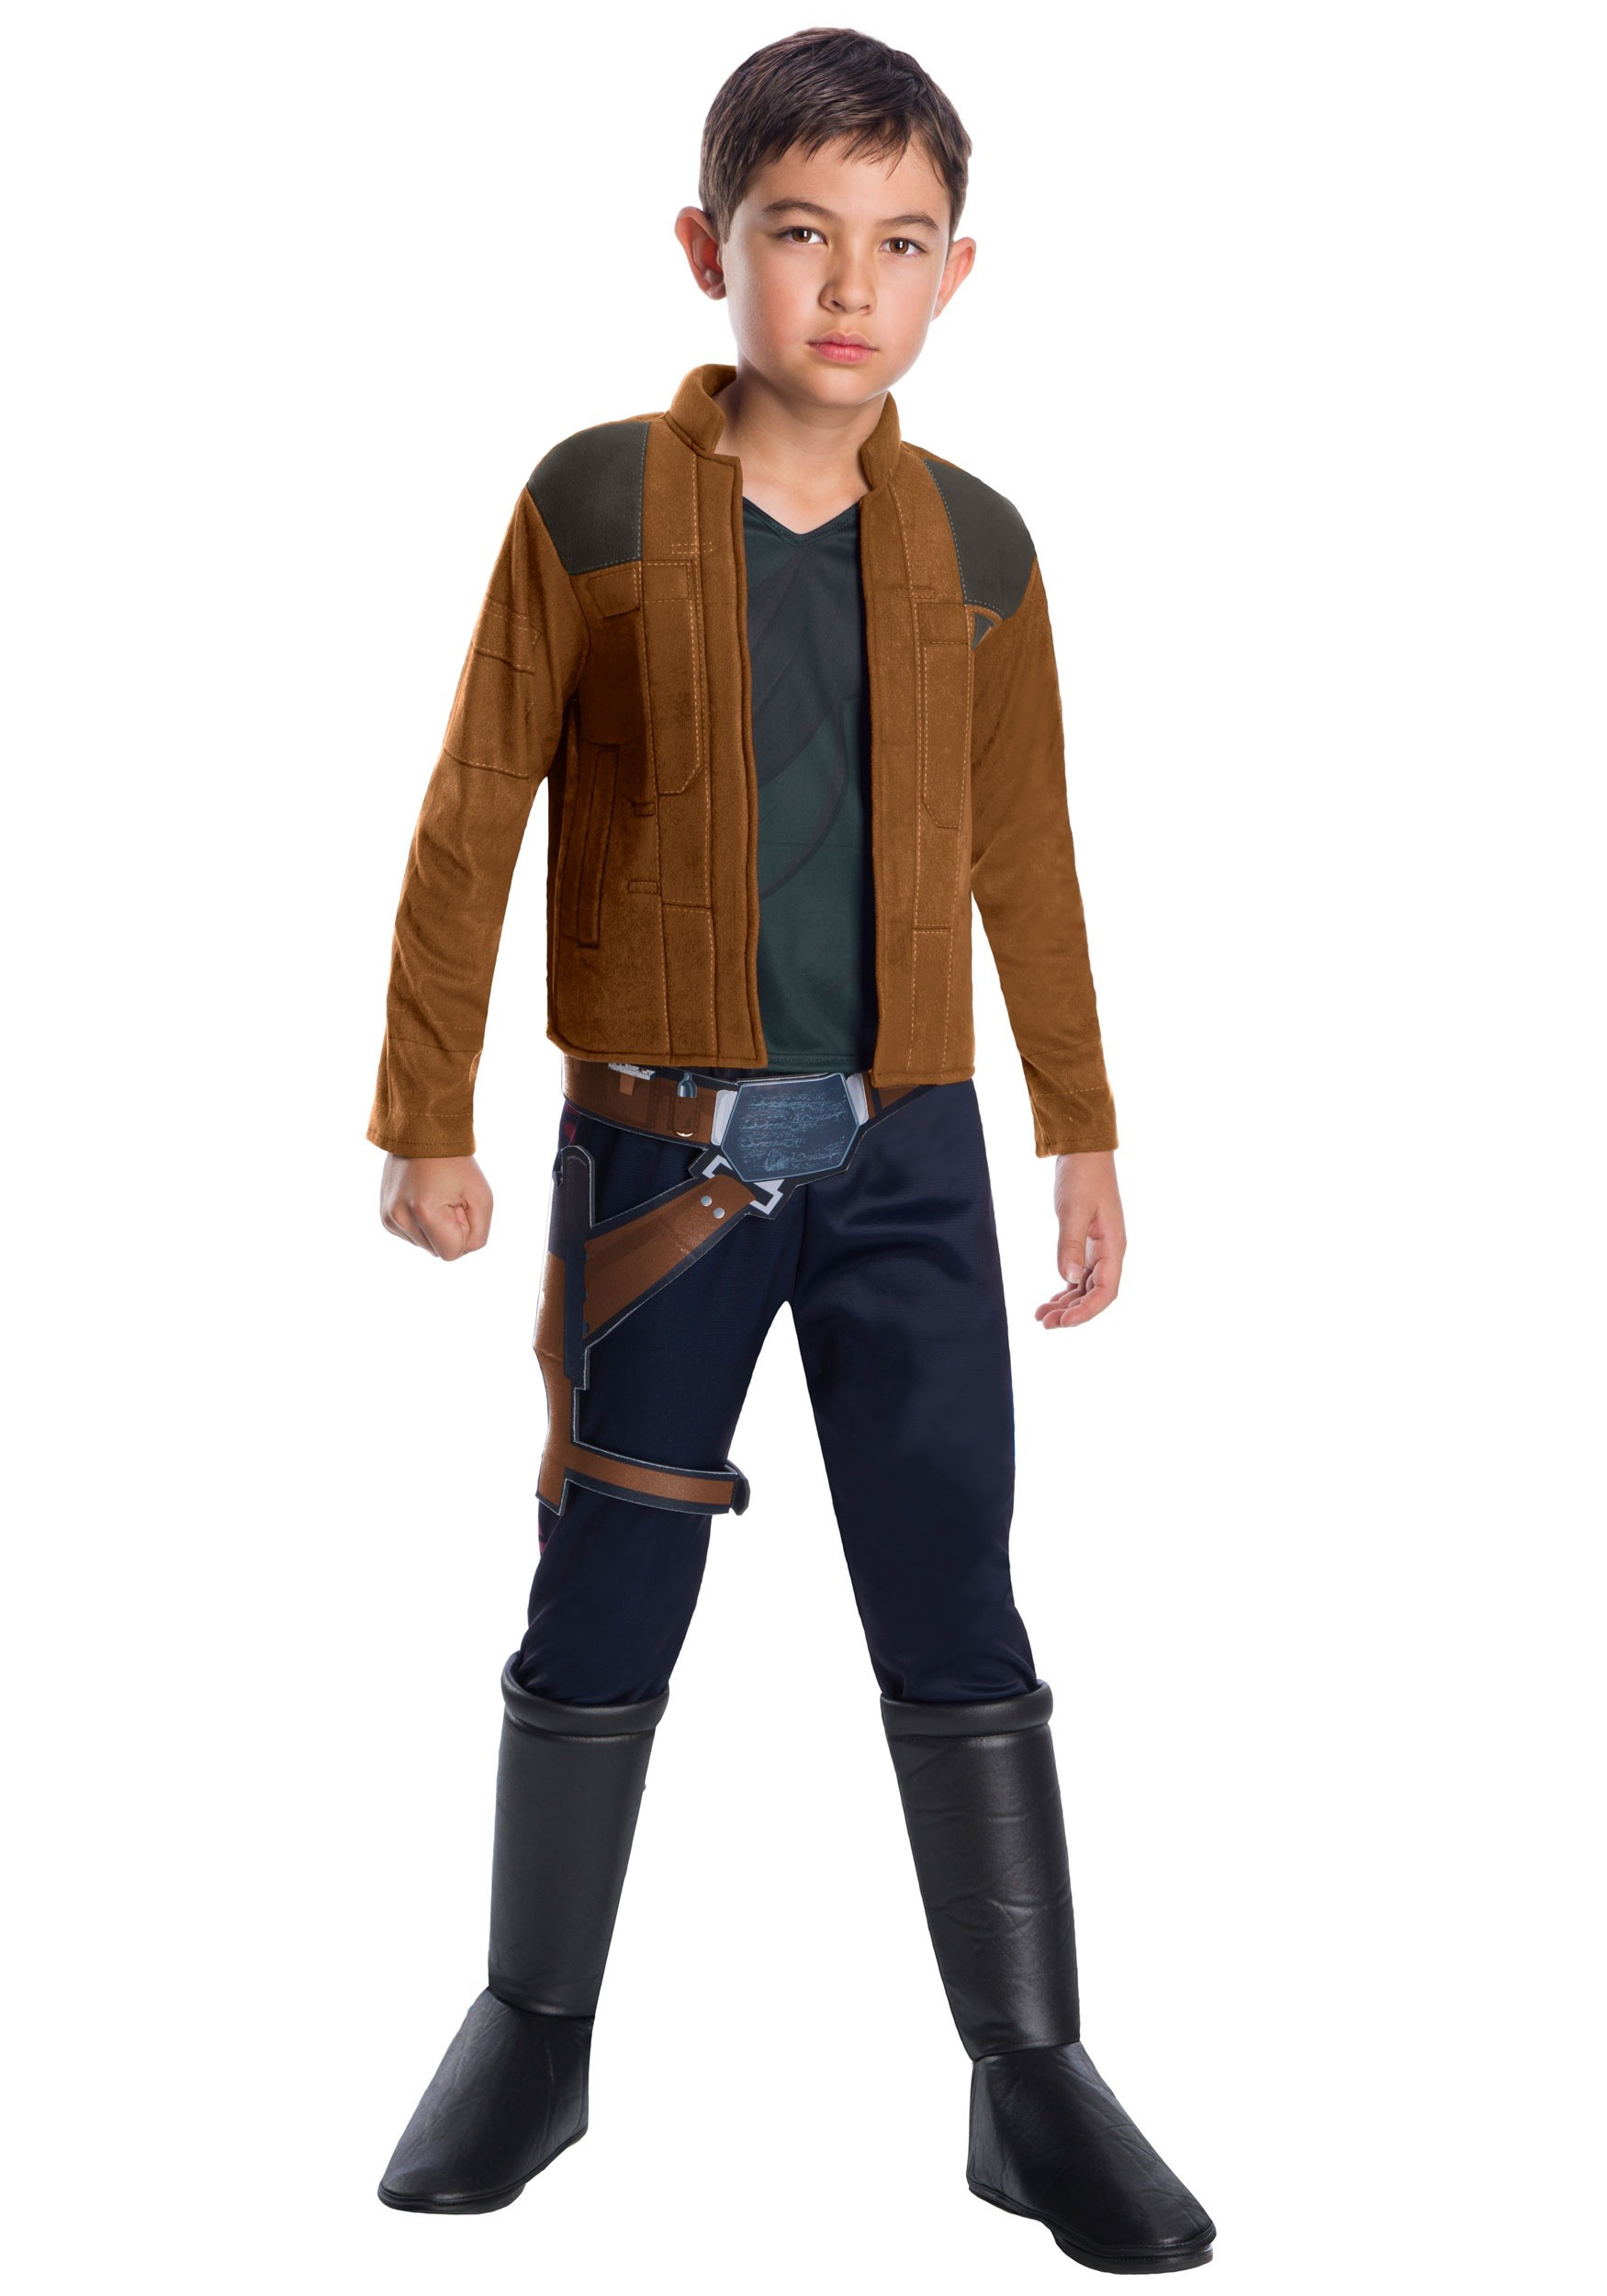 Star Wars DIY Costumes
 Star Wars Story Solo Han Solo Costume for a Child